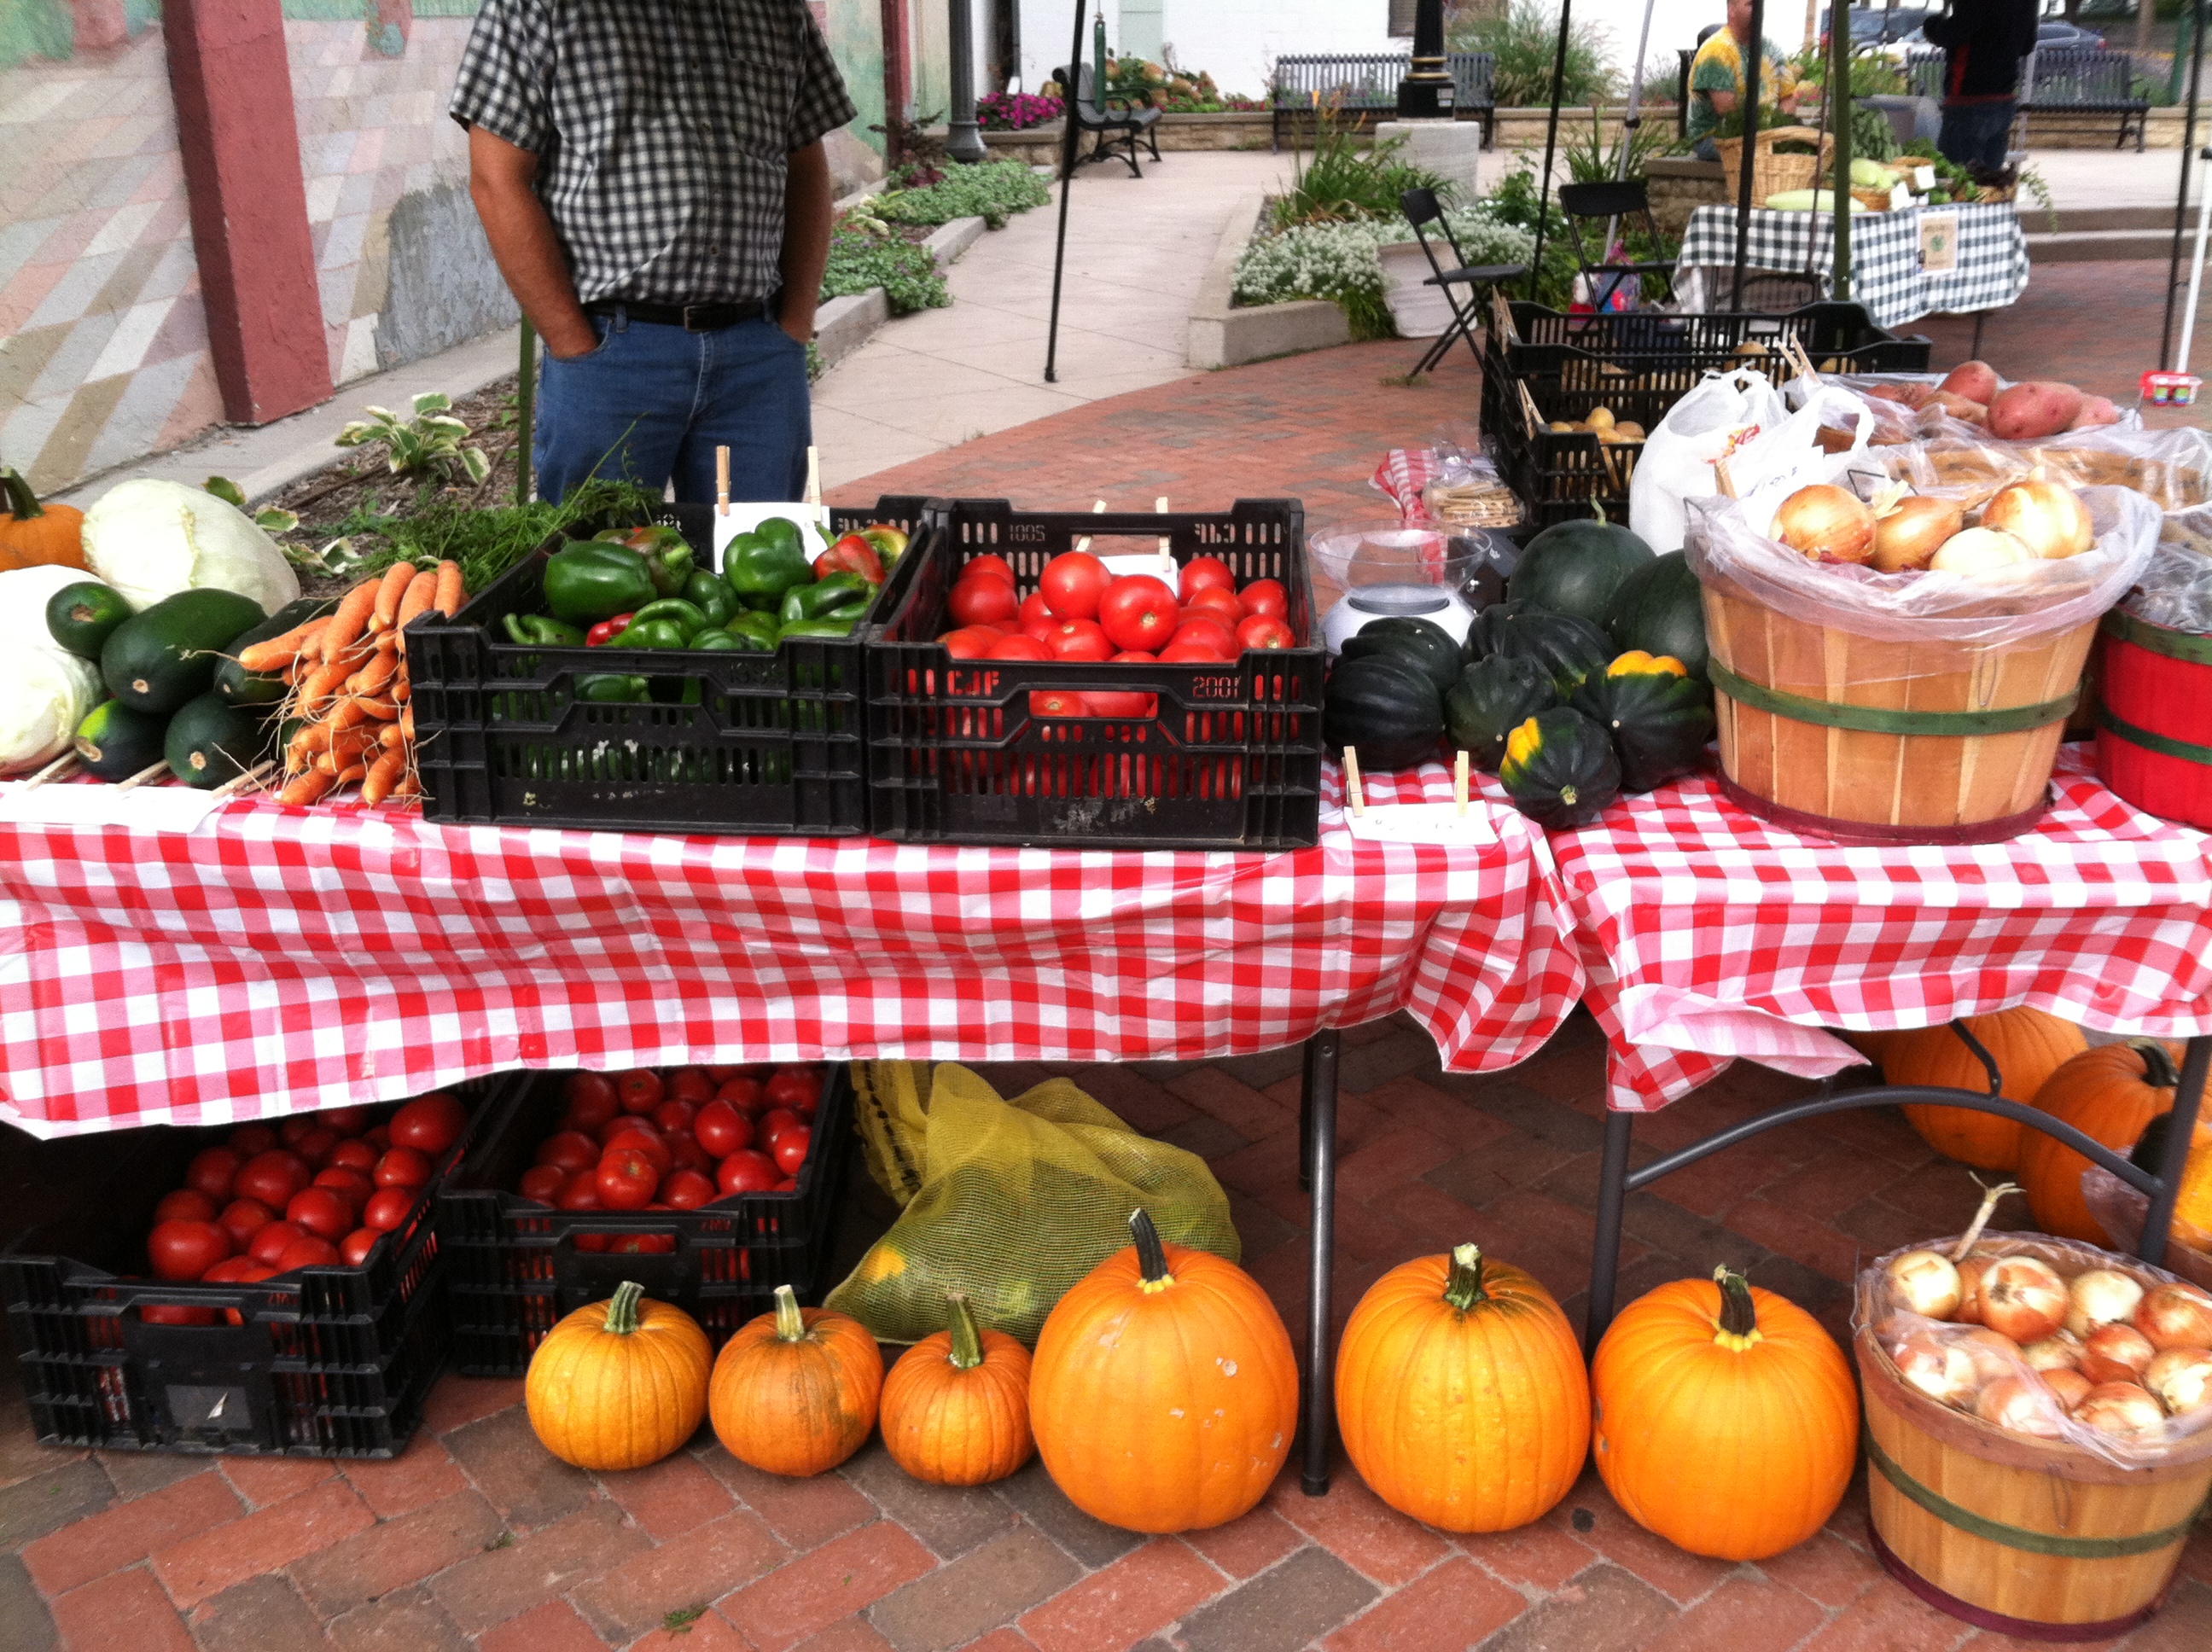 A table at a farmers market filled with fresh vegetable displays.